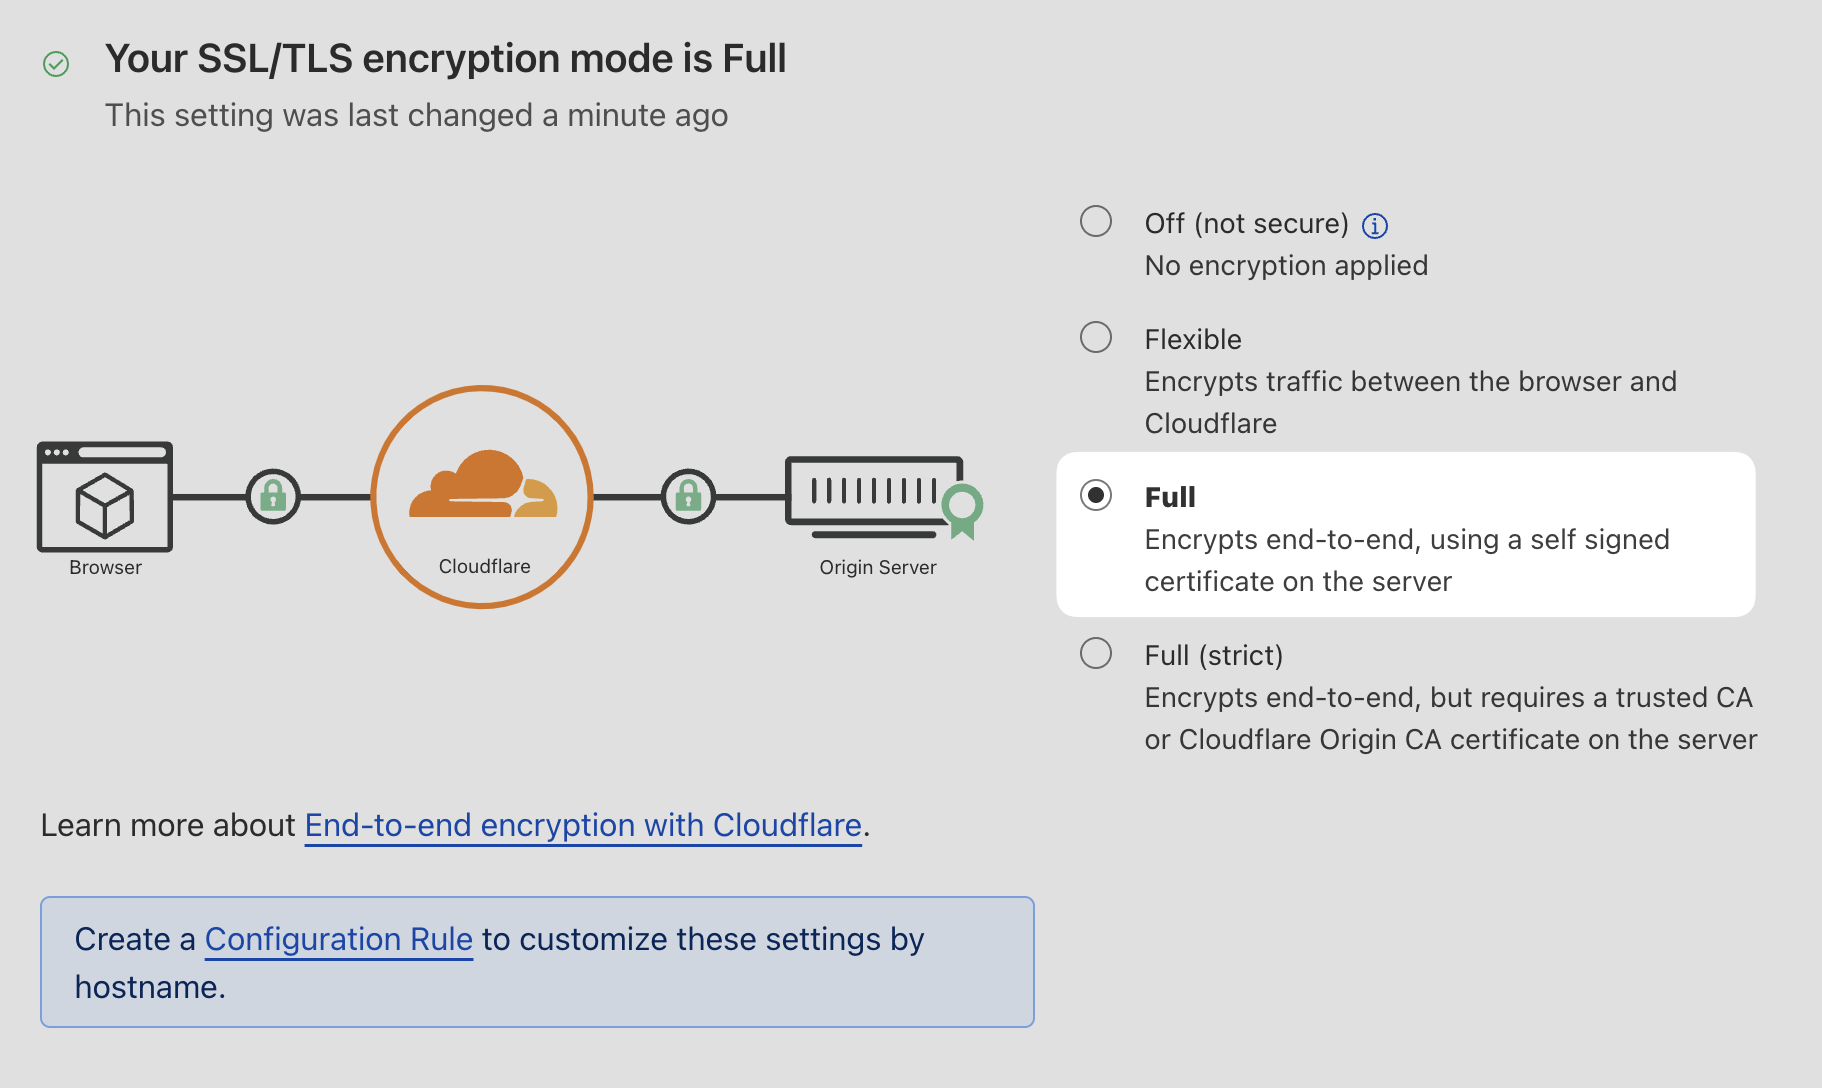 SSL/TLS encryption mode needs to be set to "Full" on Cloudflare